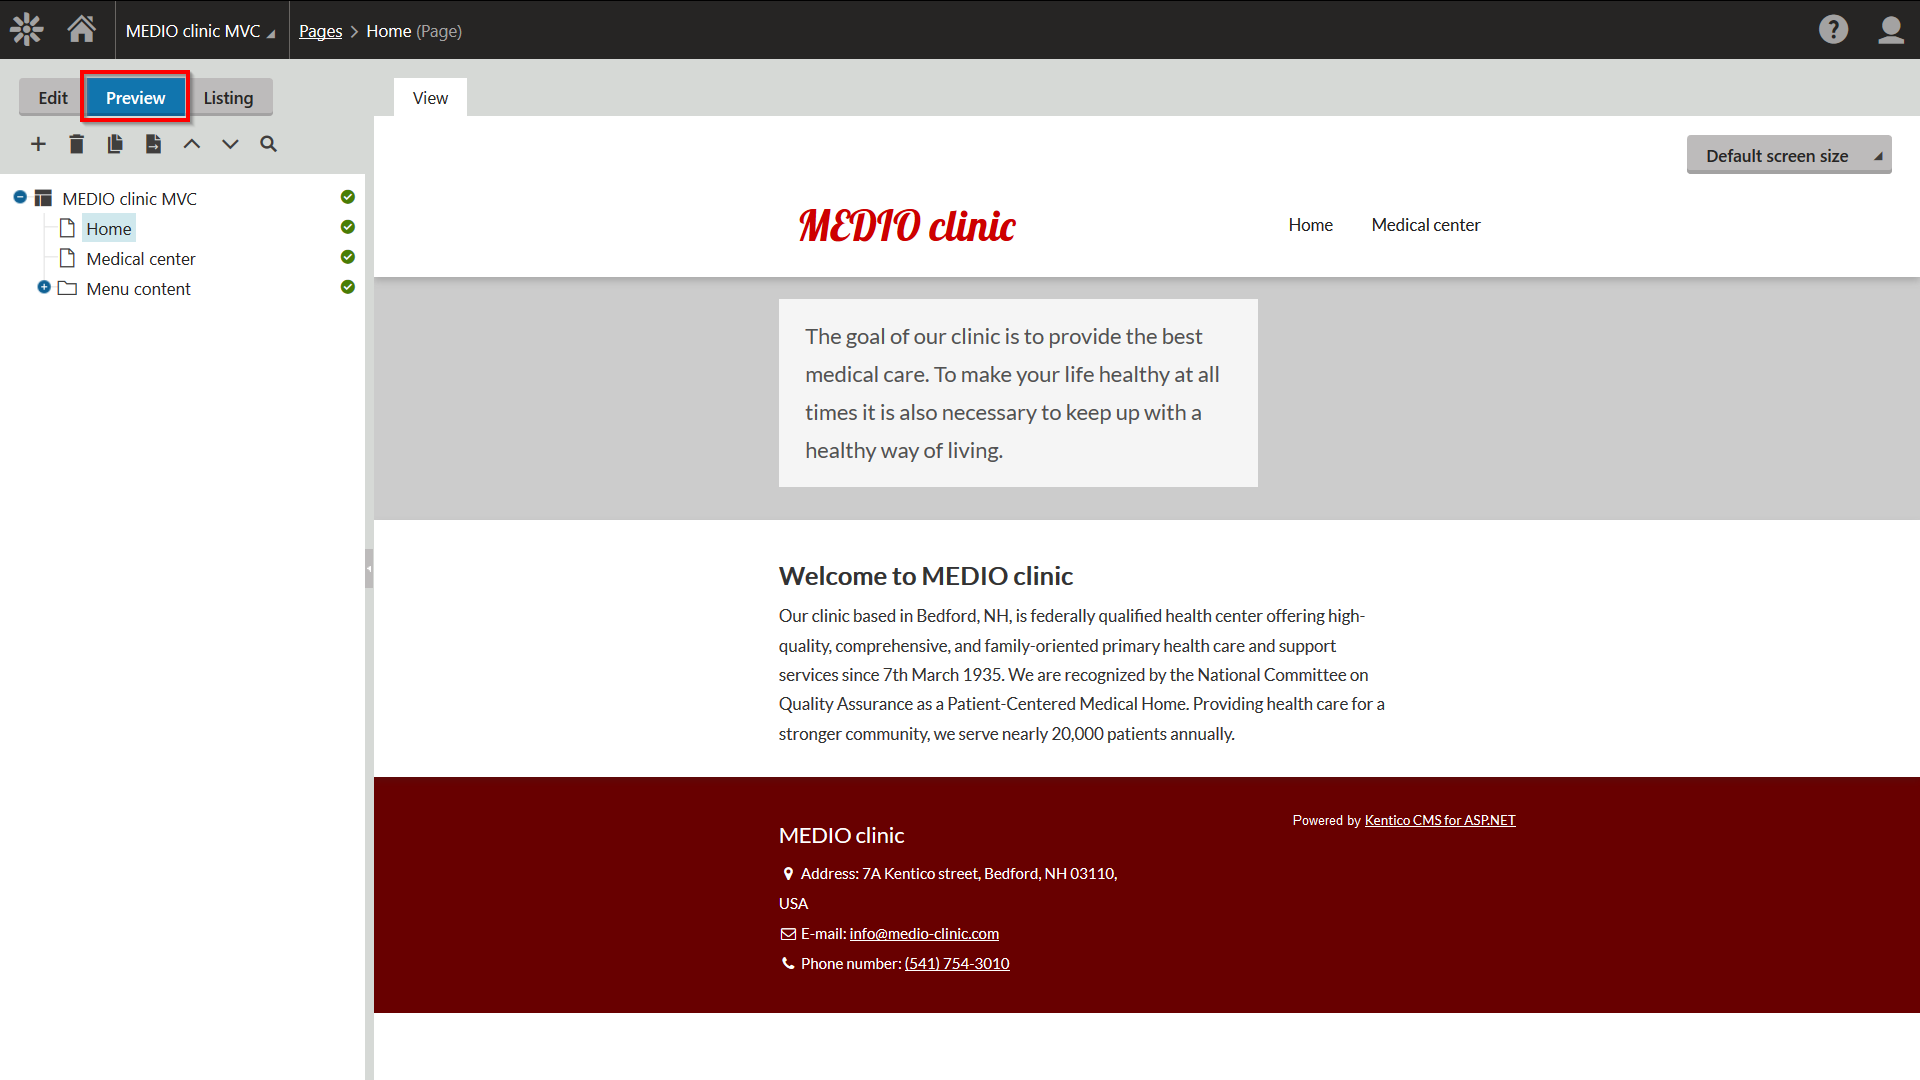 Preview of the Medio Clinic’s page in the administration interface